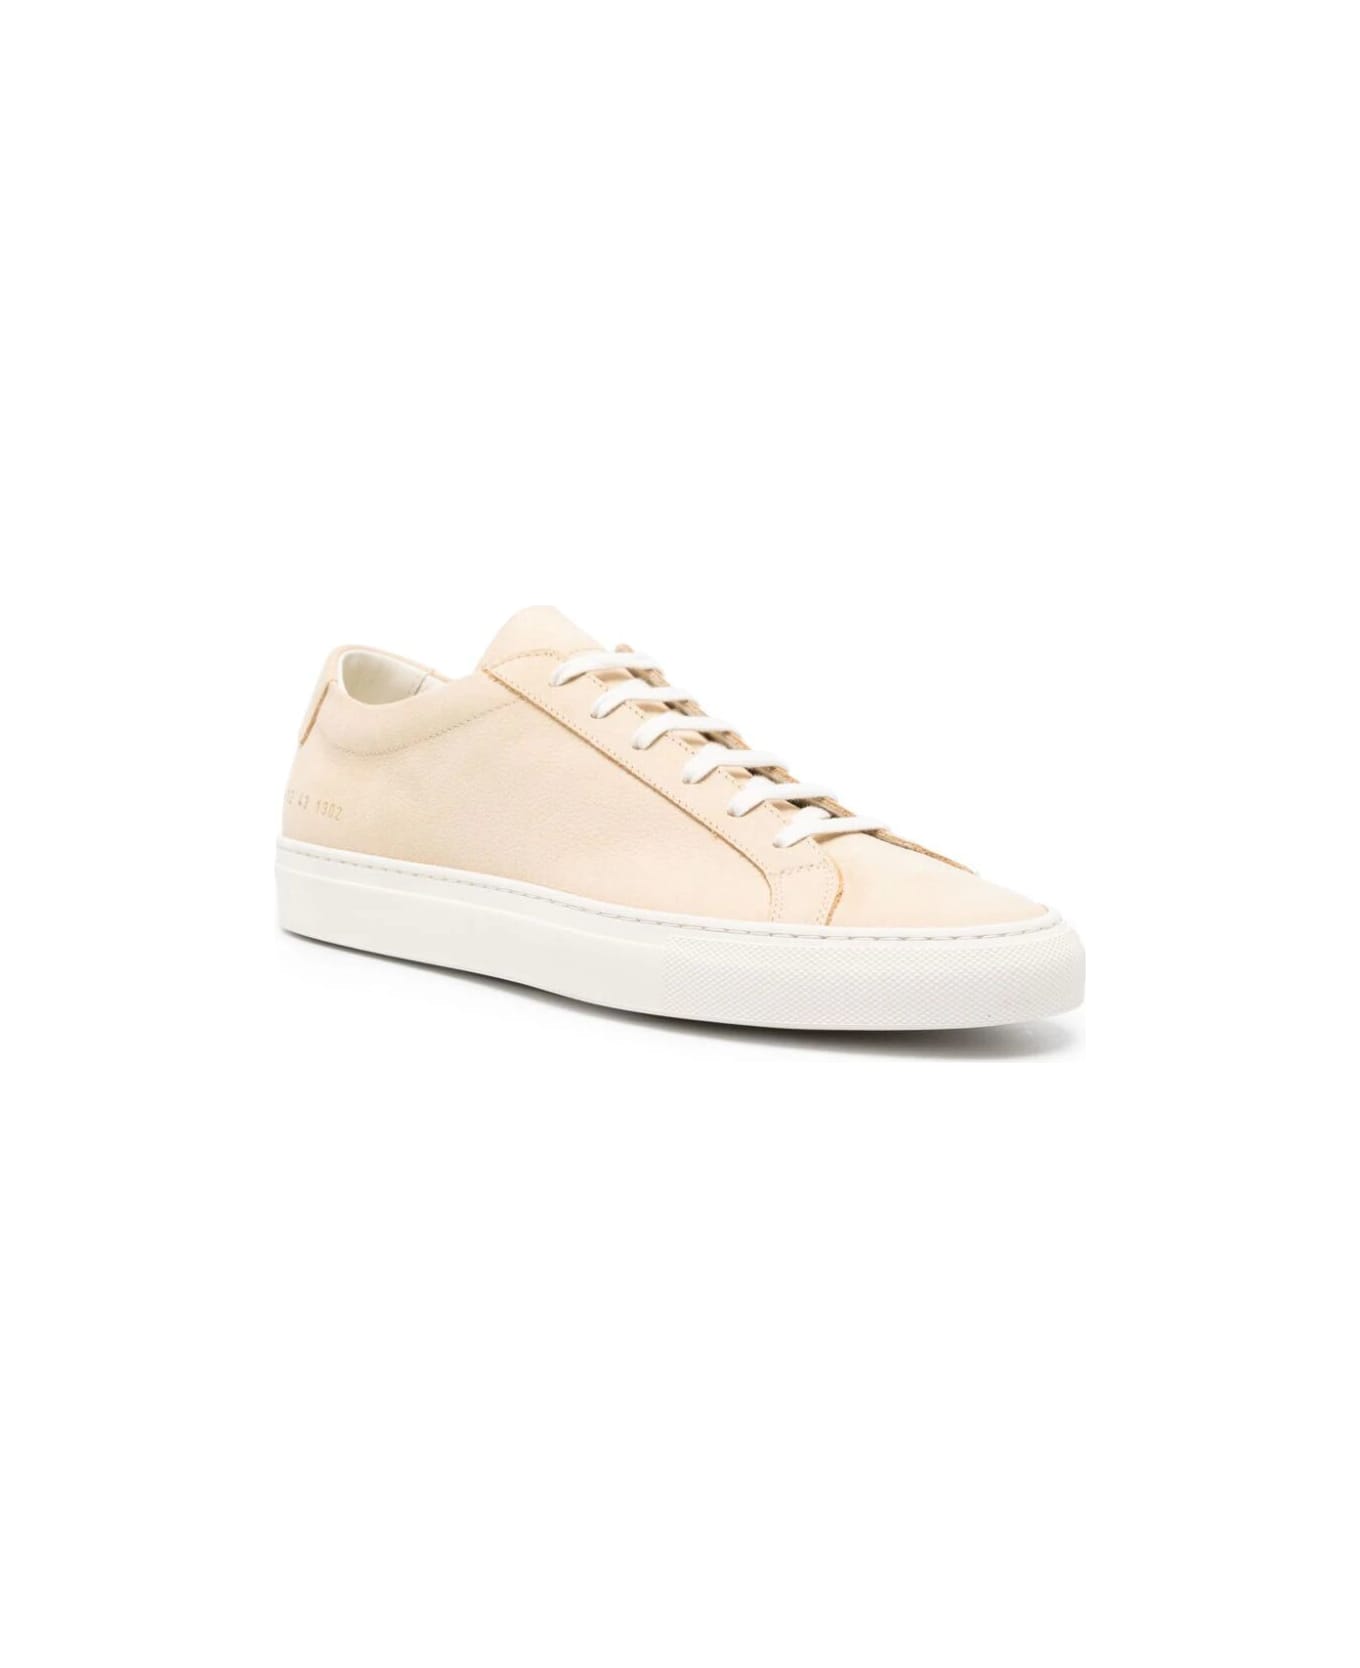 Common Projects Contrast Achilles Sneaker - Tan